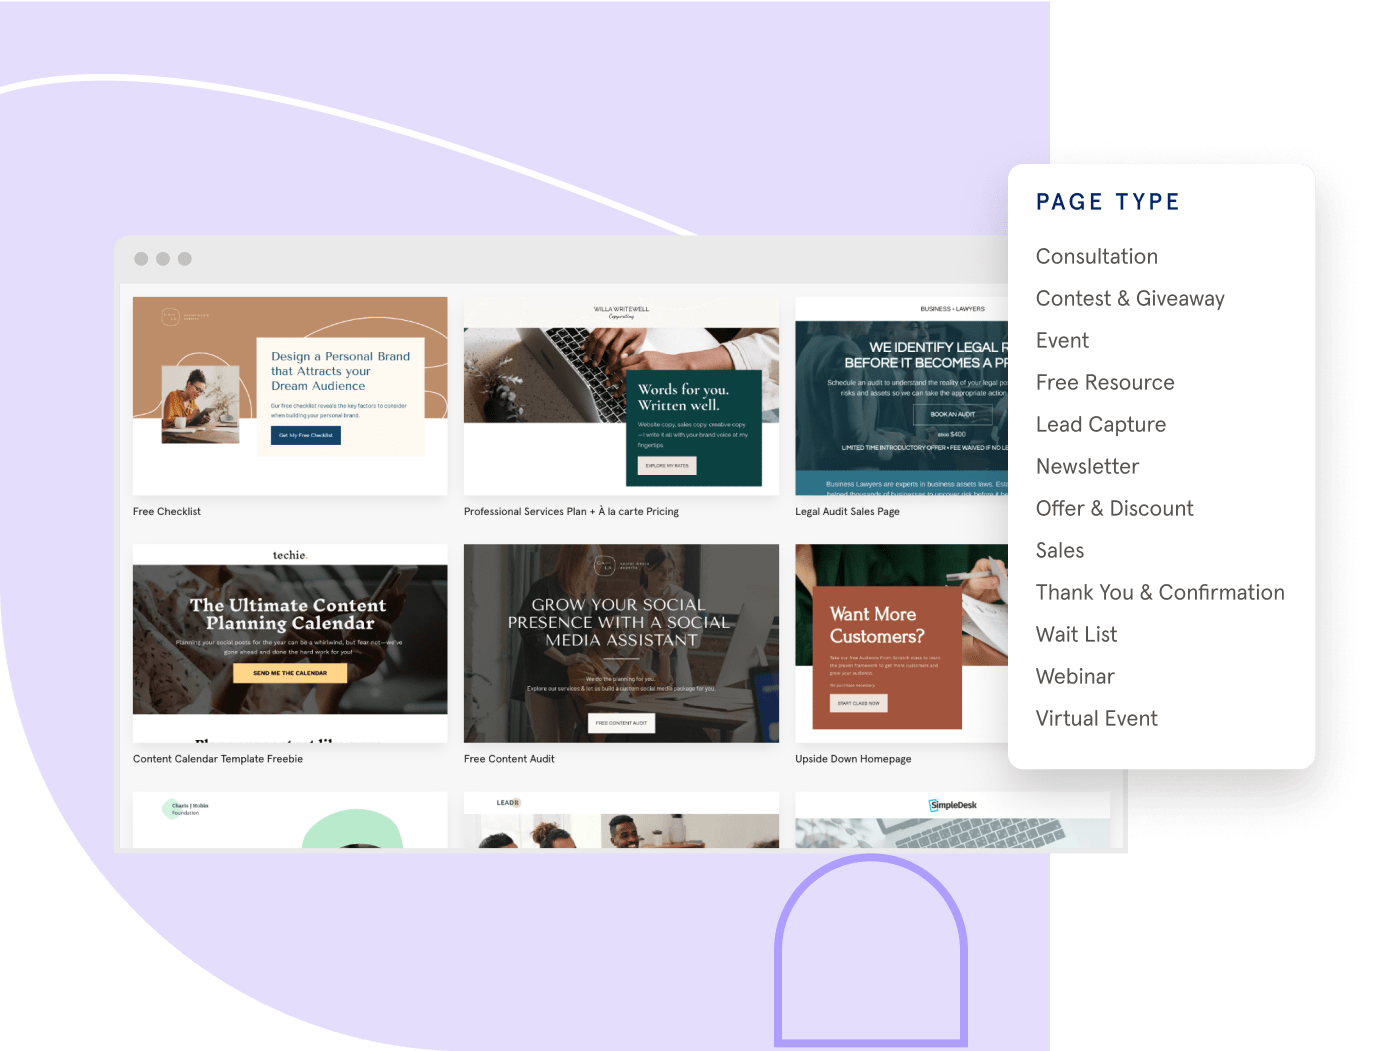 template gallery with landing page templates and a list of page types